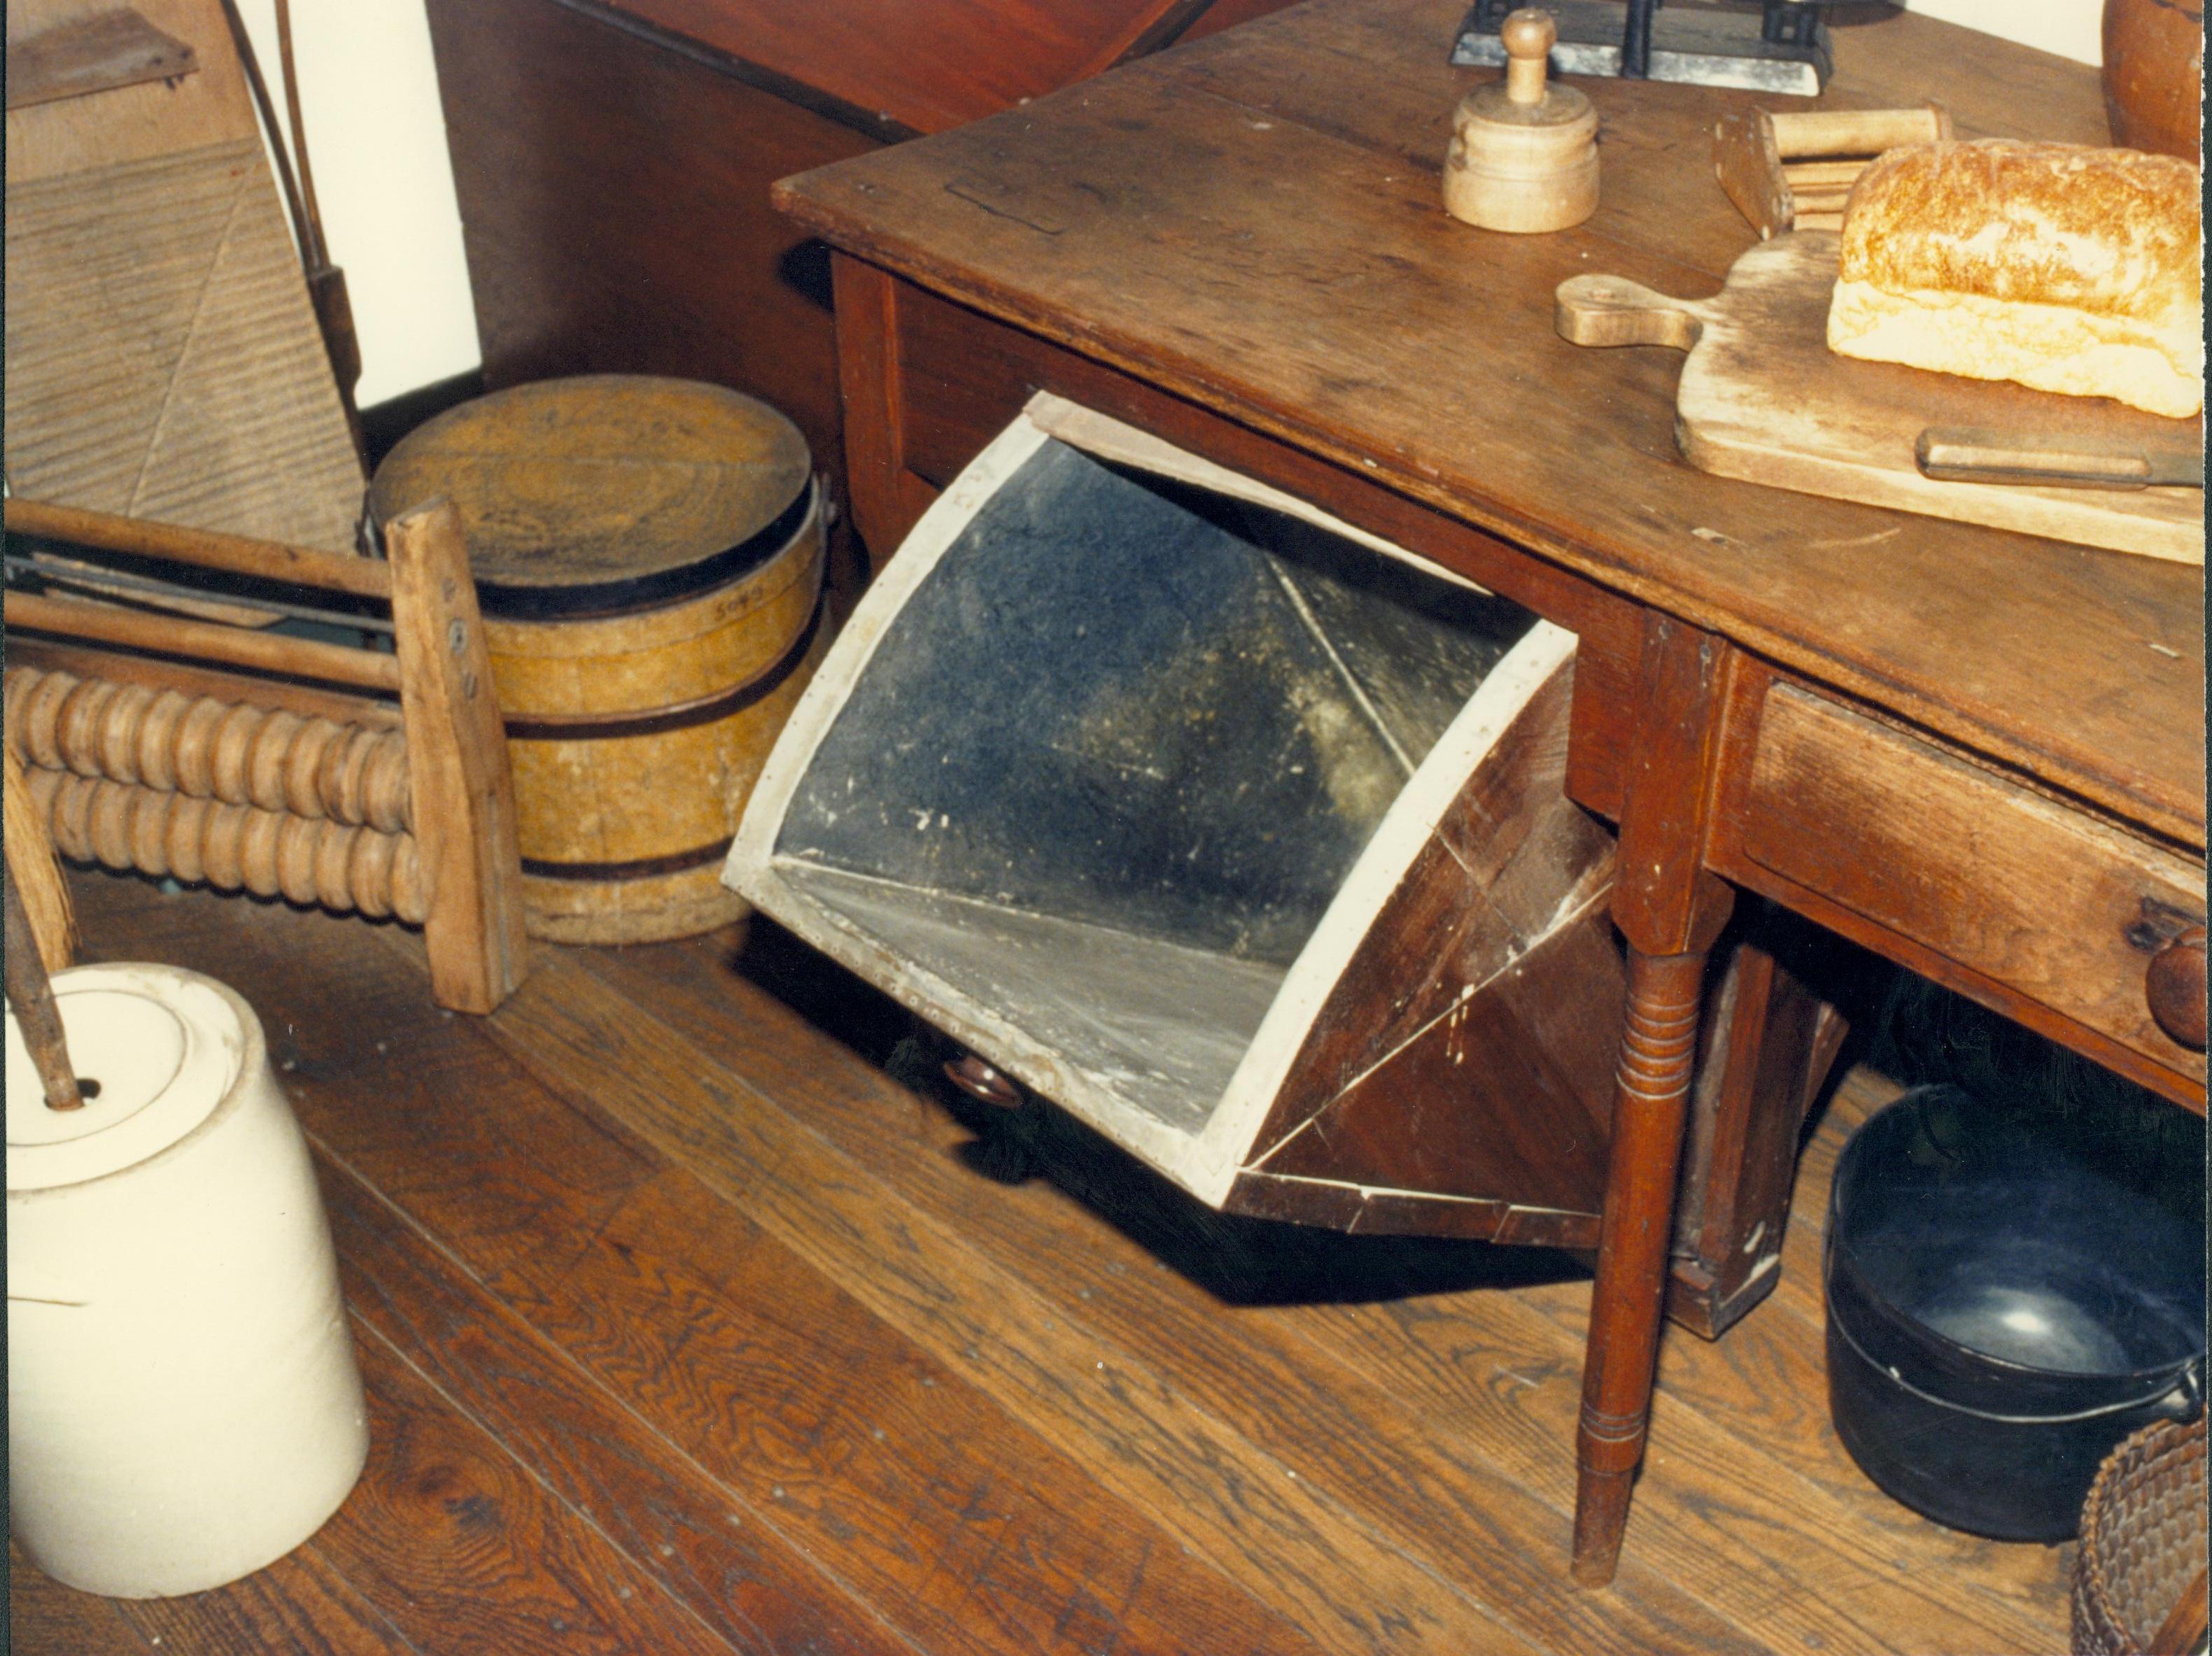 NA Lincoln, Home, Kitchen, artifacts